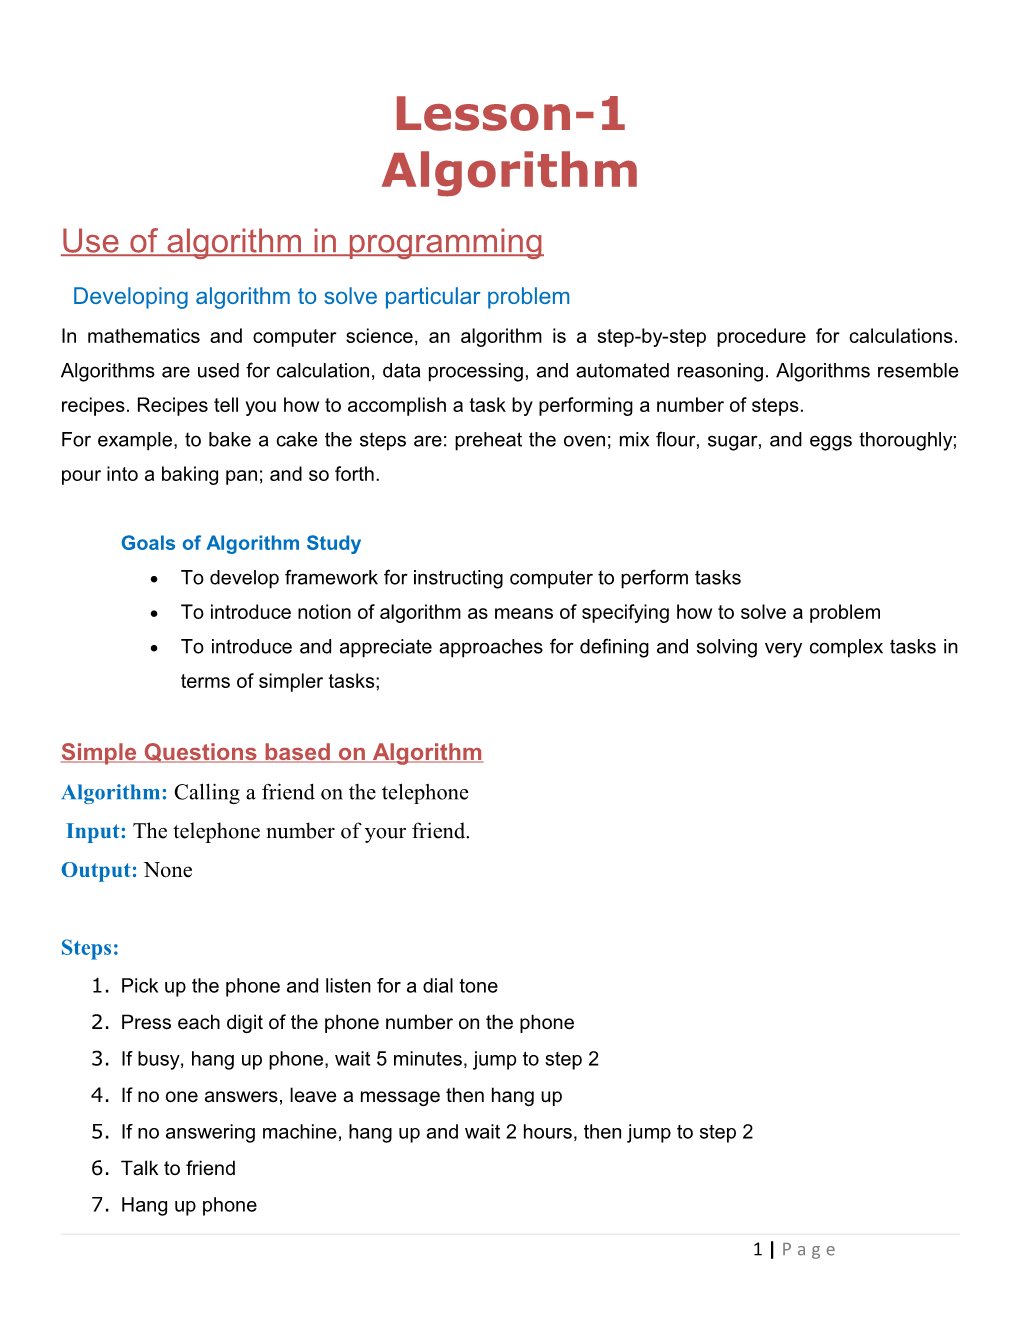 Developing Algorithm to Solve Particular Problem